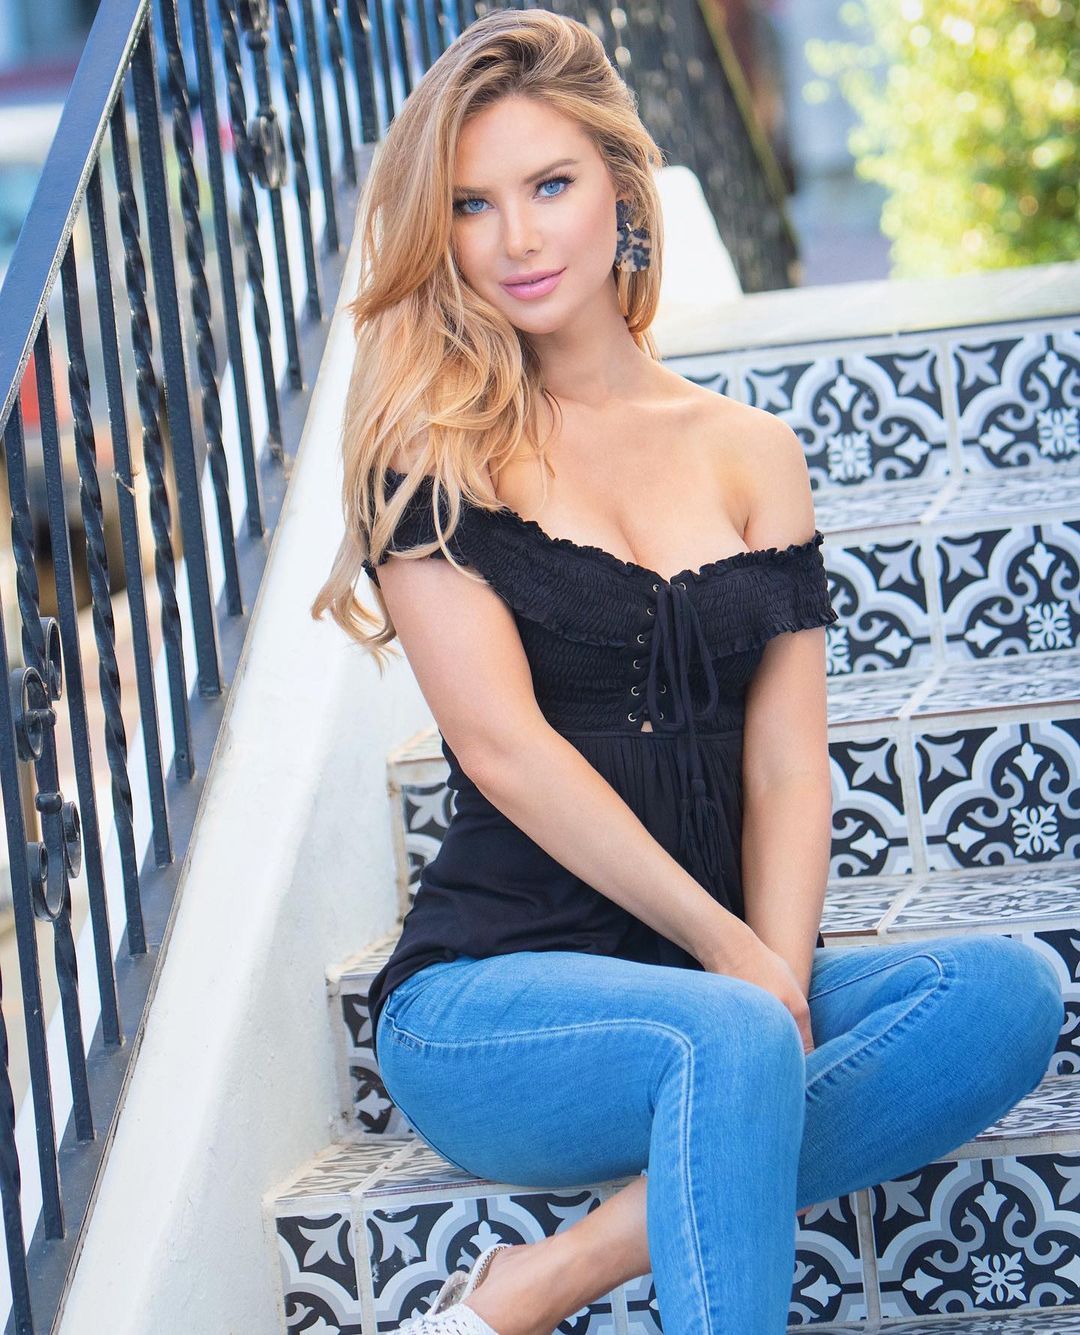 See more of the stunning model Tiffany Toth on her Instagram at. fitnessmod...